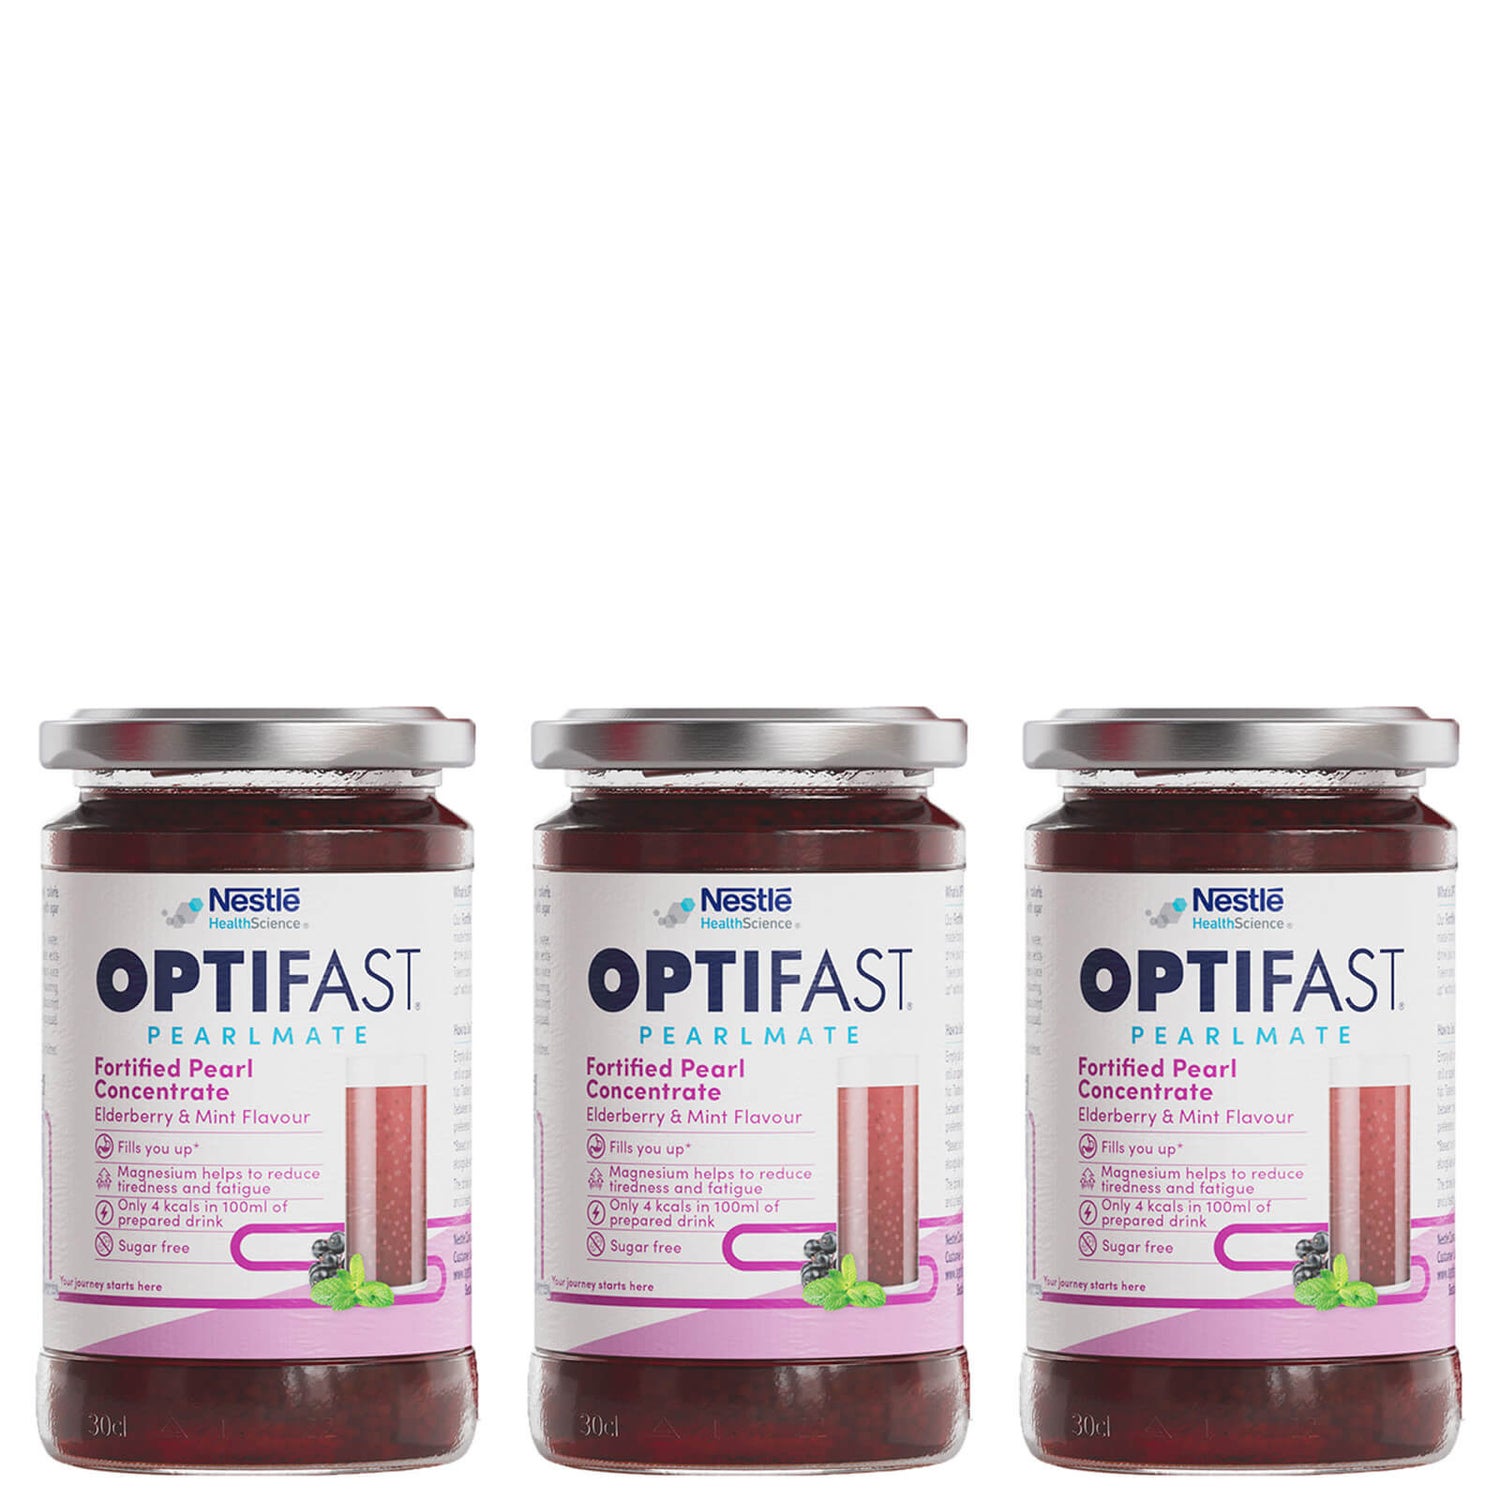 Optifast Pearlmate Concentrate 3 Pack